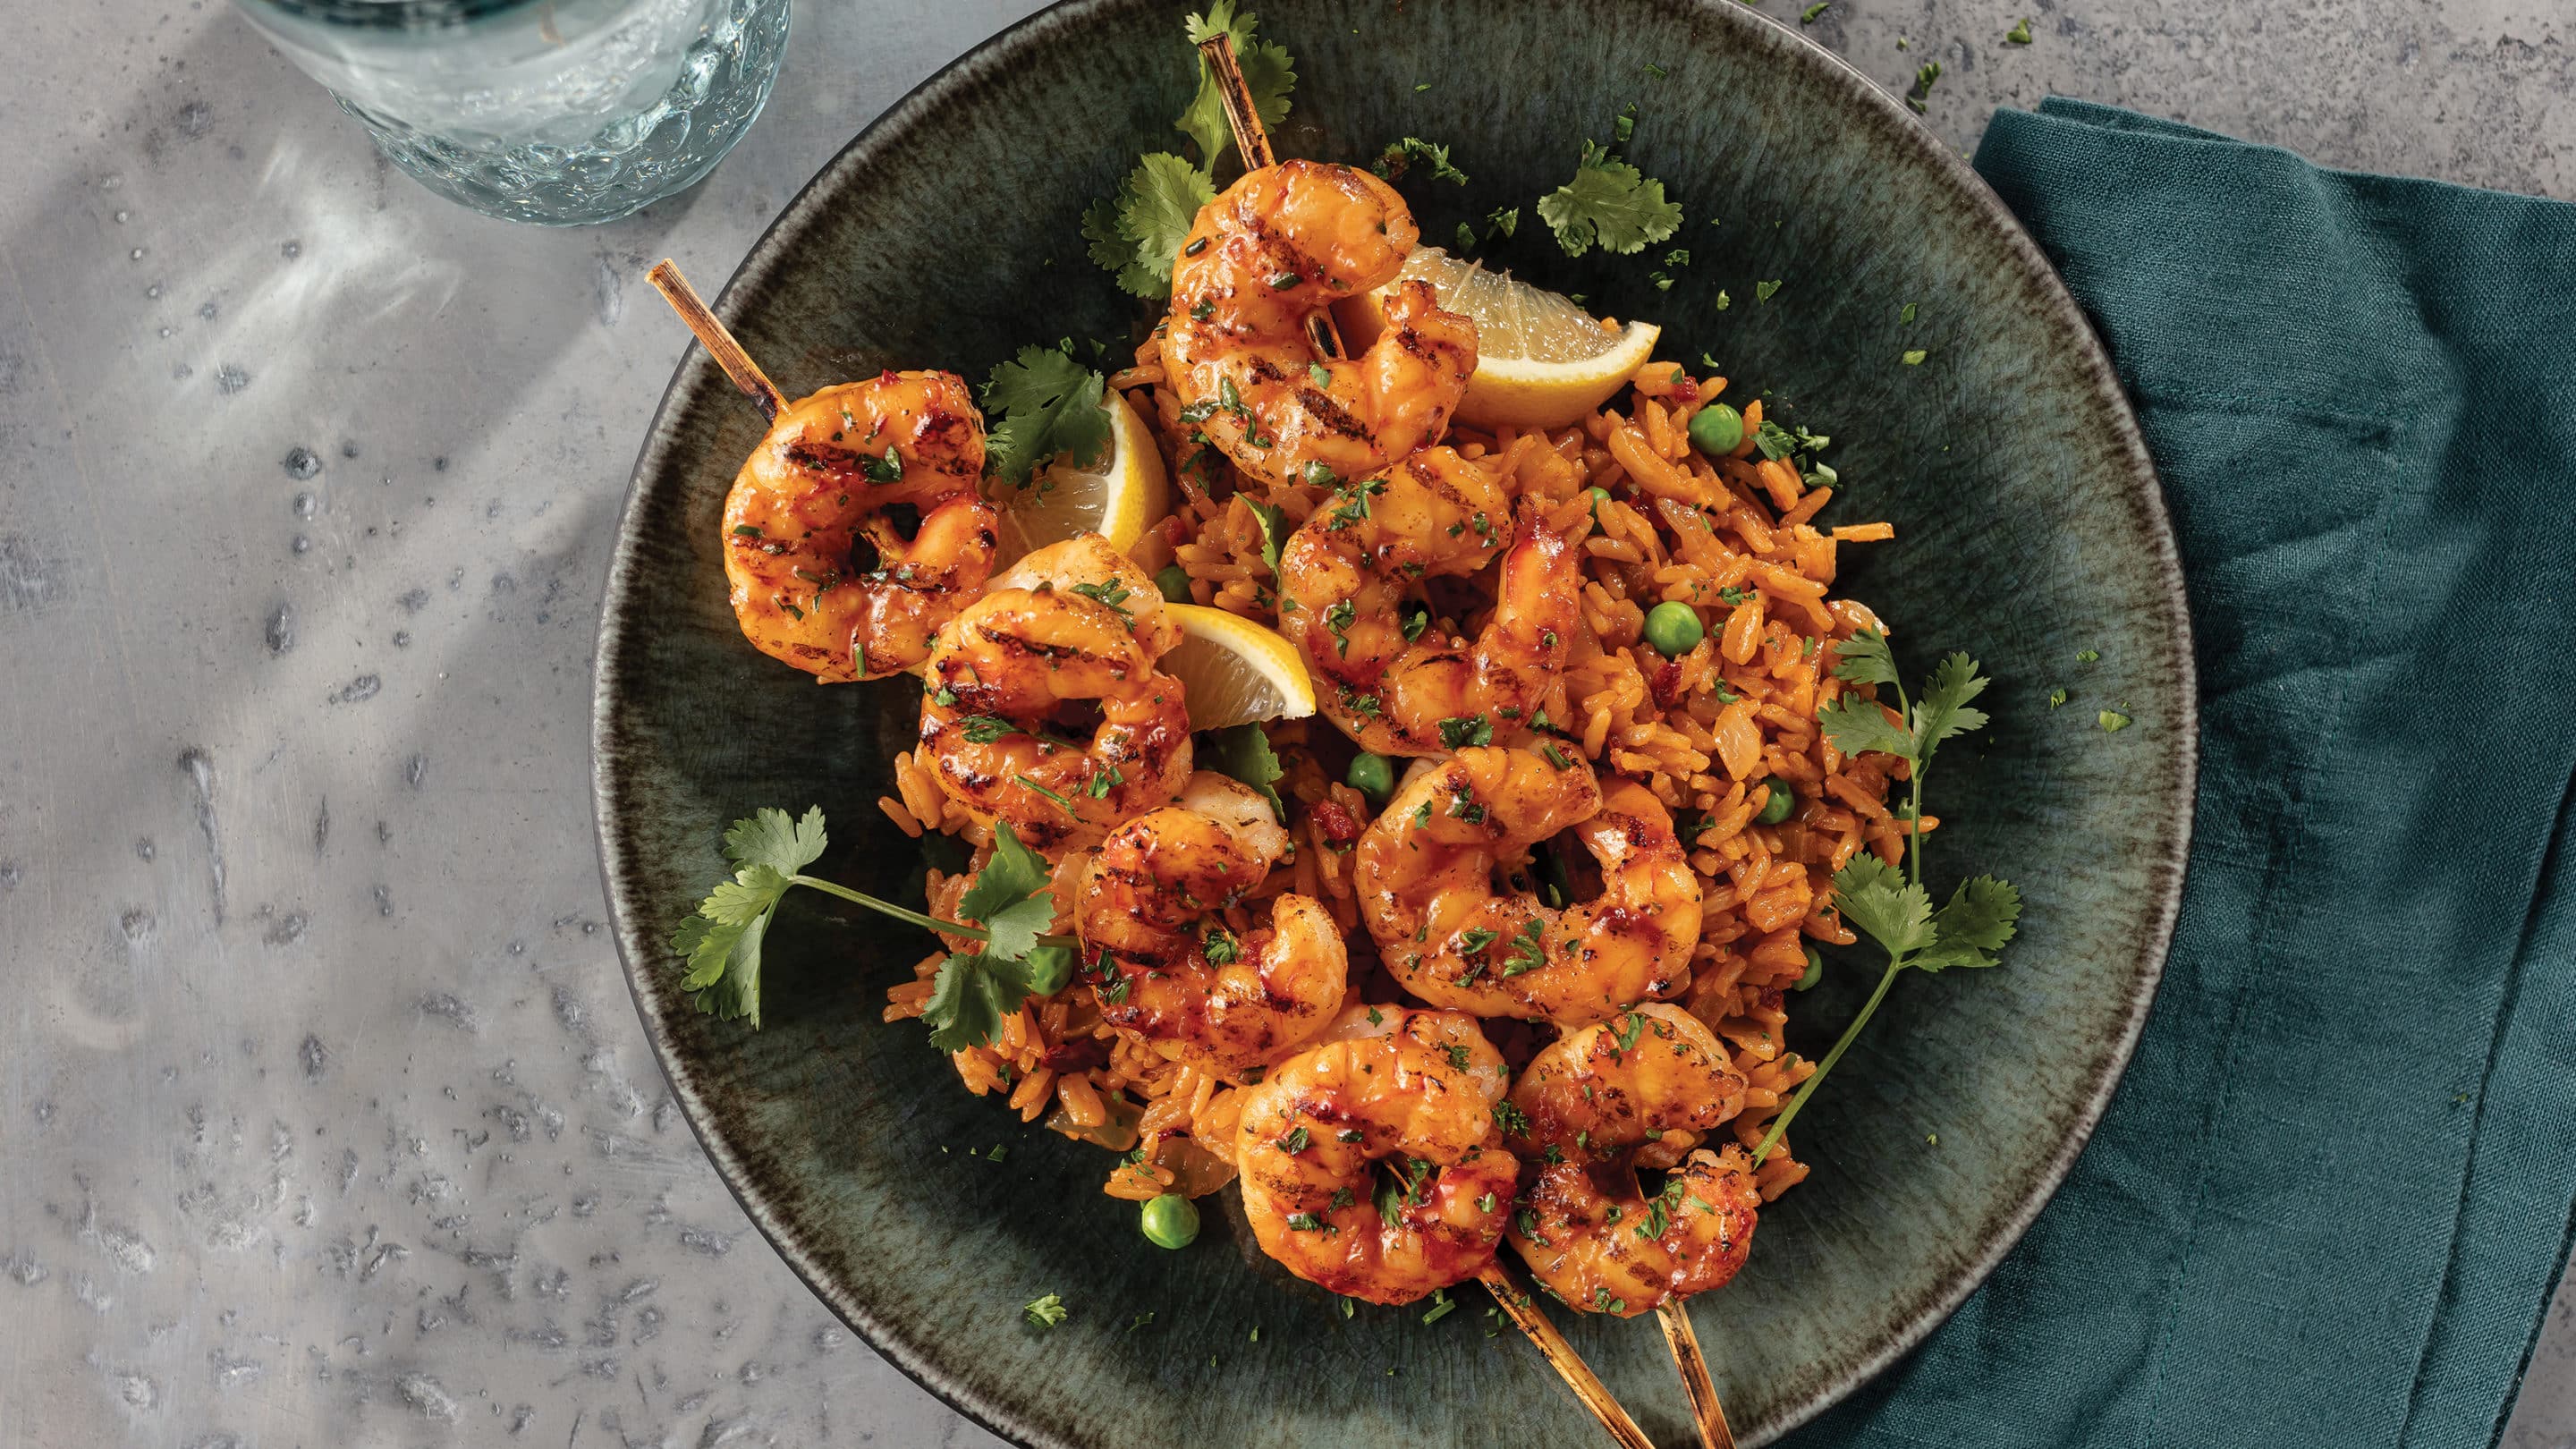 Grilled Lemon Chipotle Shrimp Skewers with Spanish Rice